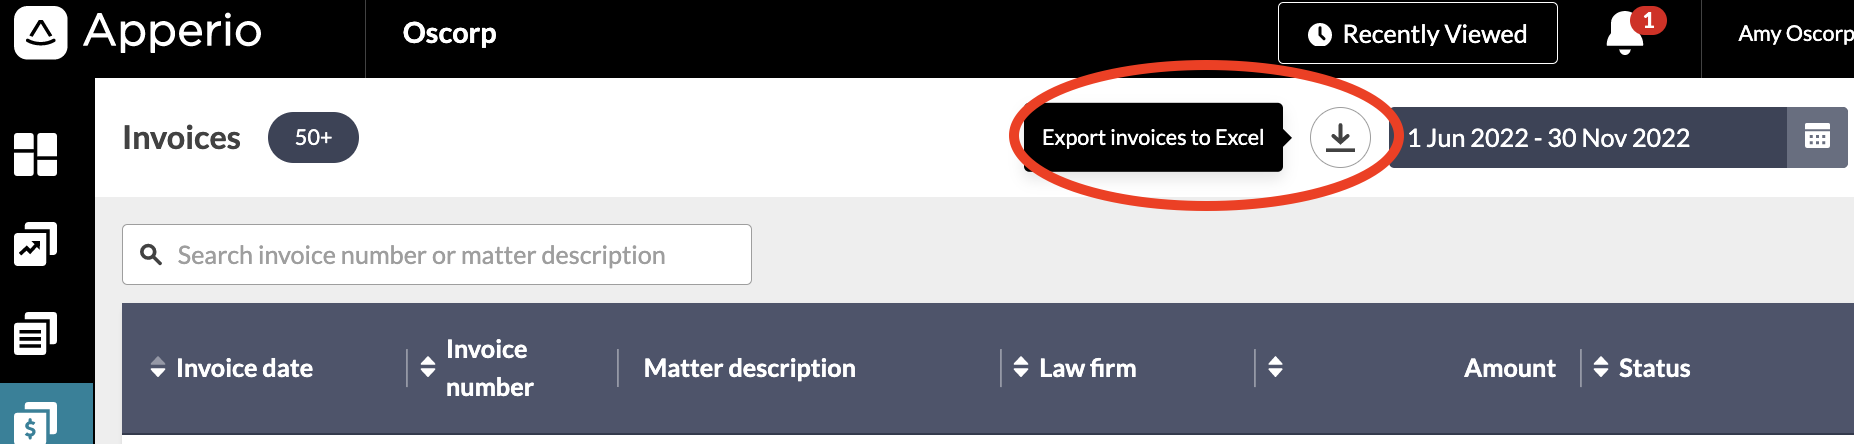 Invoice_export_image_2.png